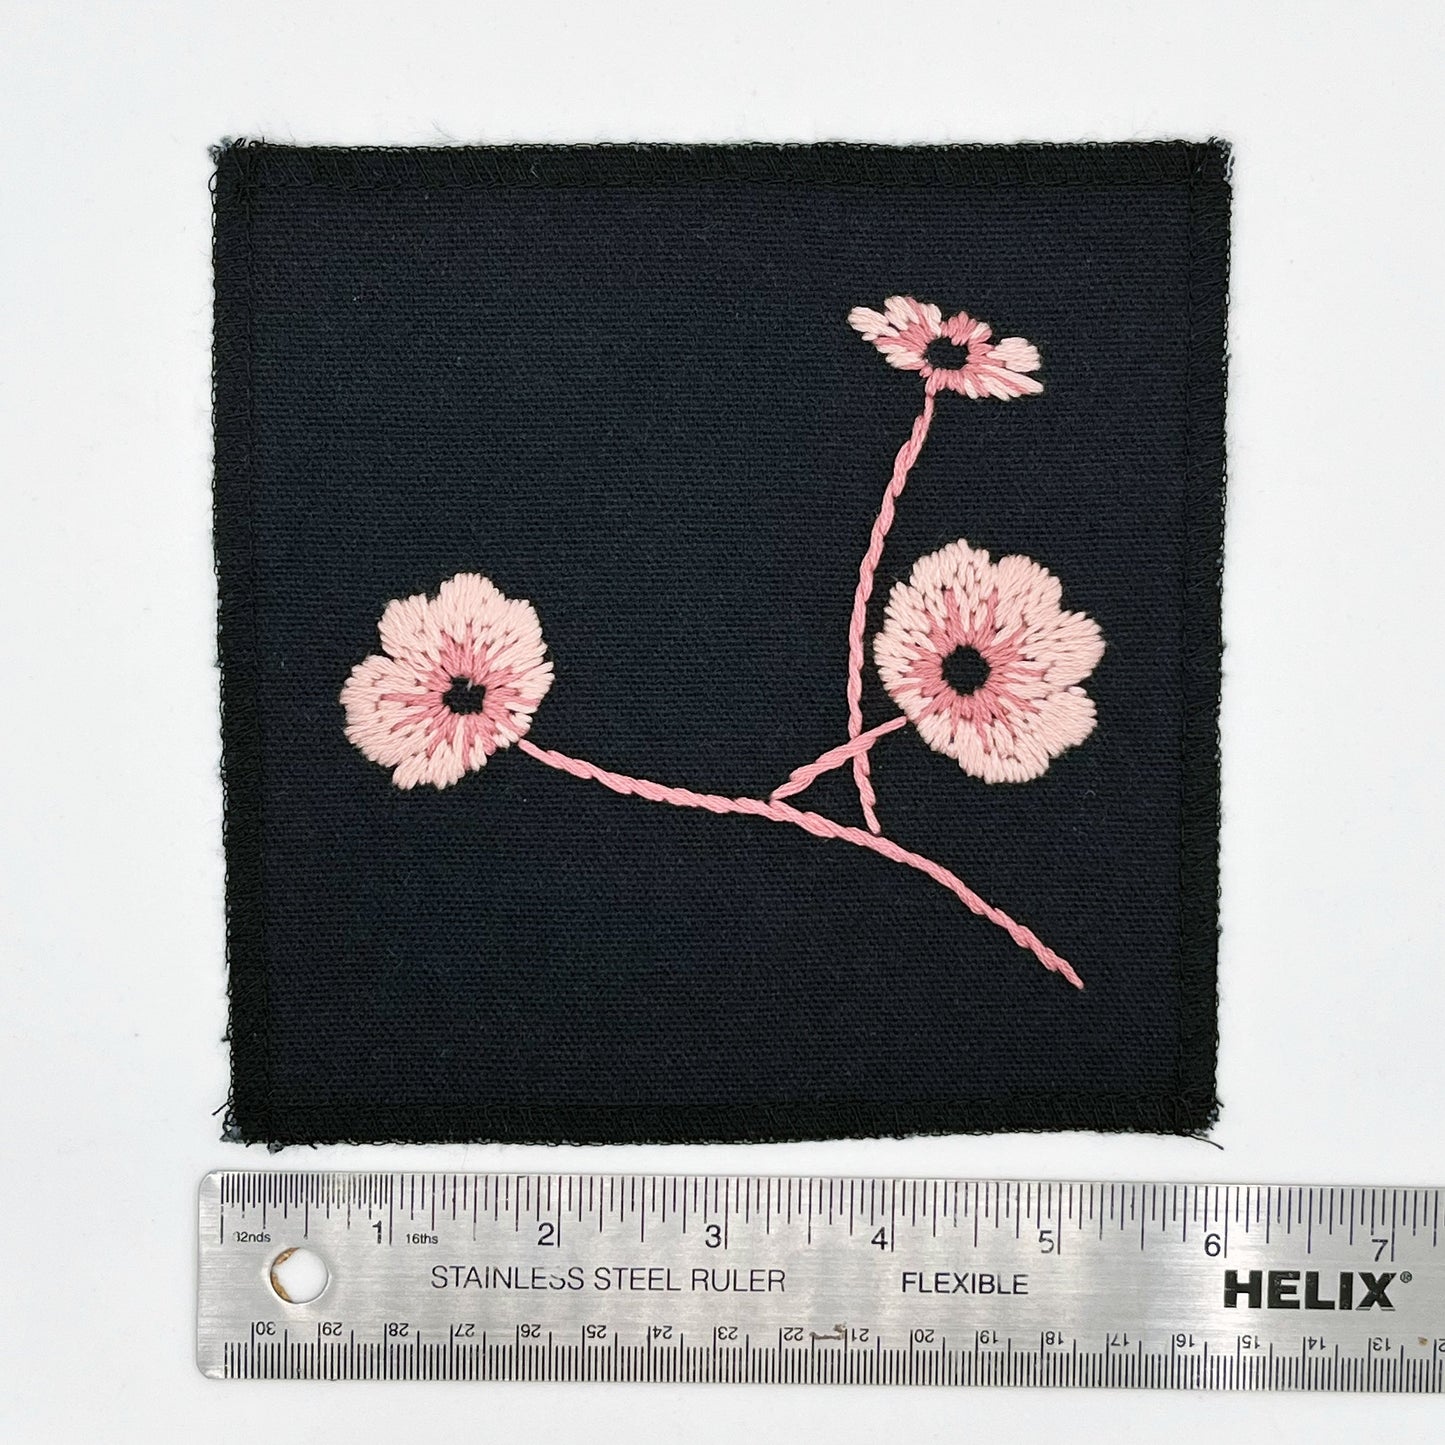 a black square patch, hand embroidered with three poppies on a stem, in shades of pink, with overlocked edges, placed next to a metal ruler to show a width of six inches, on a white background